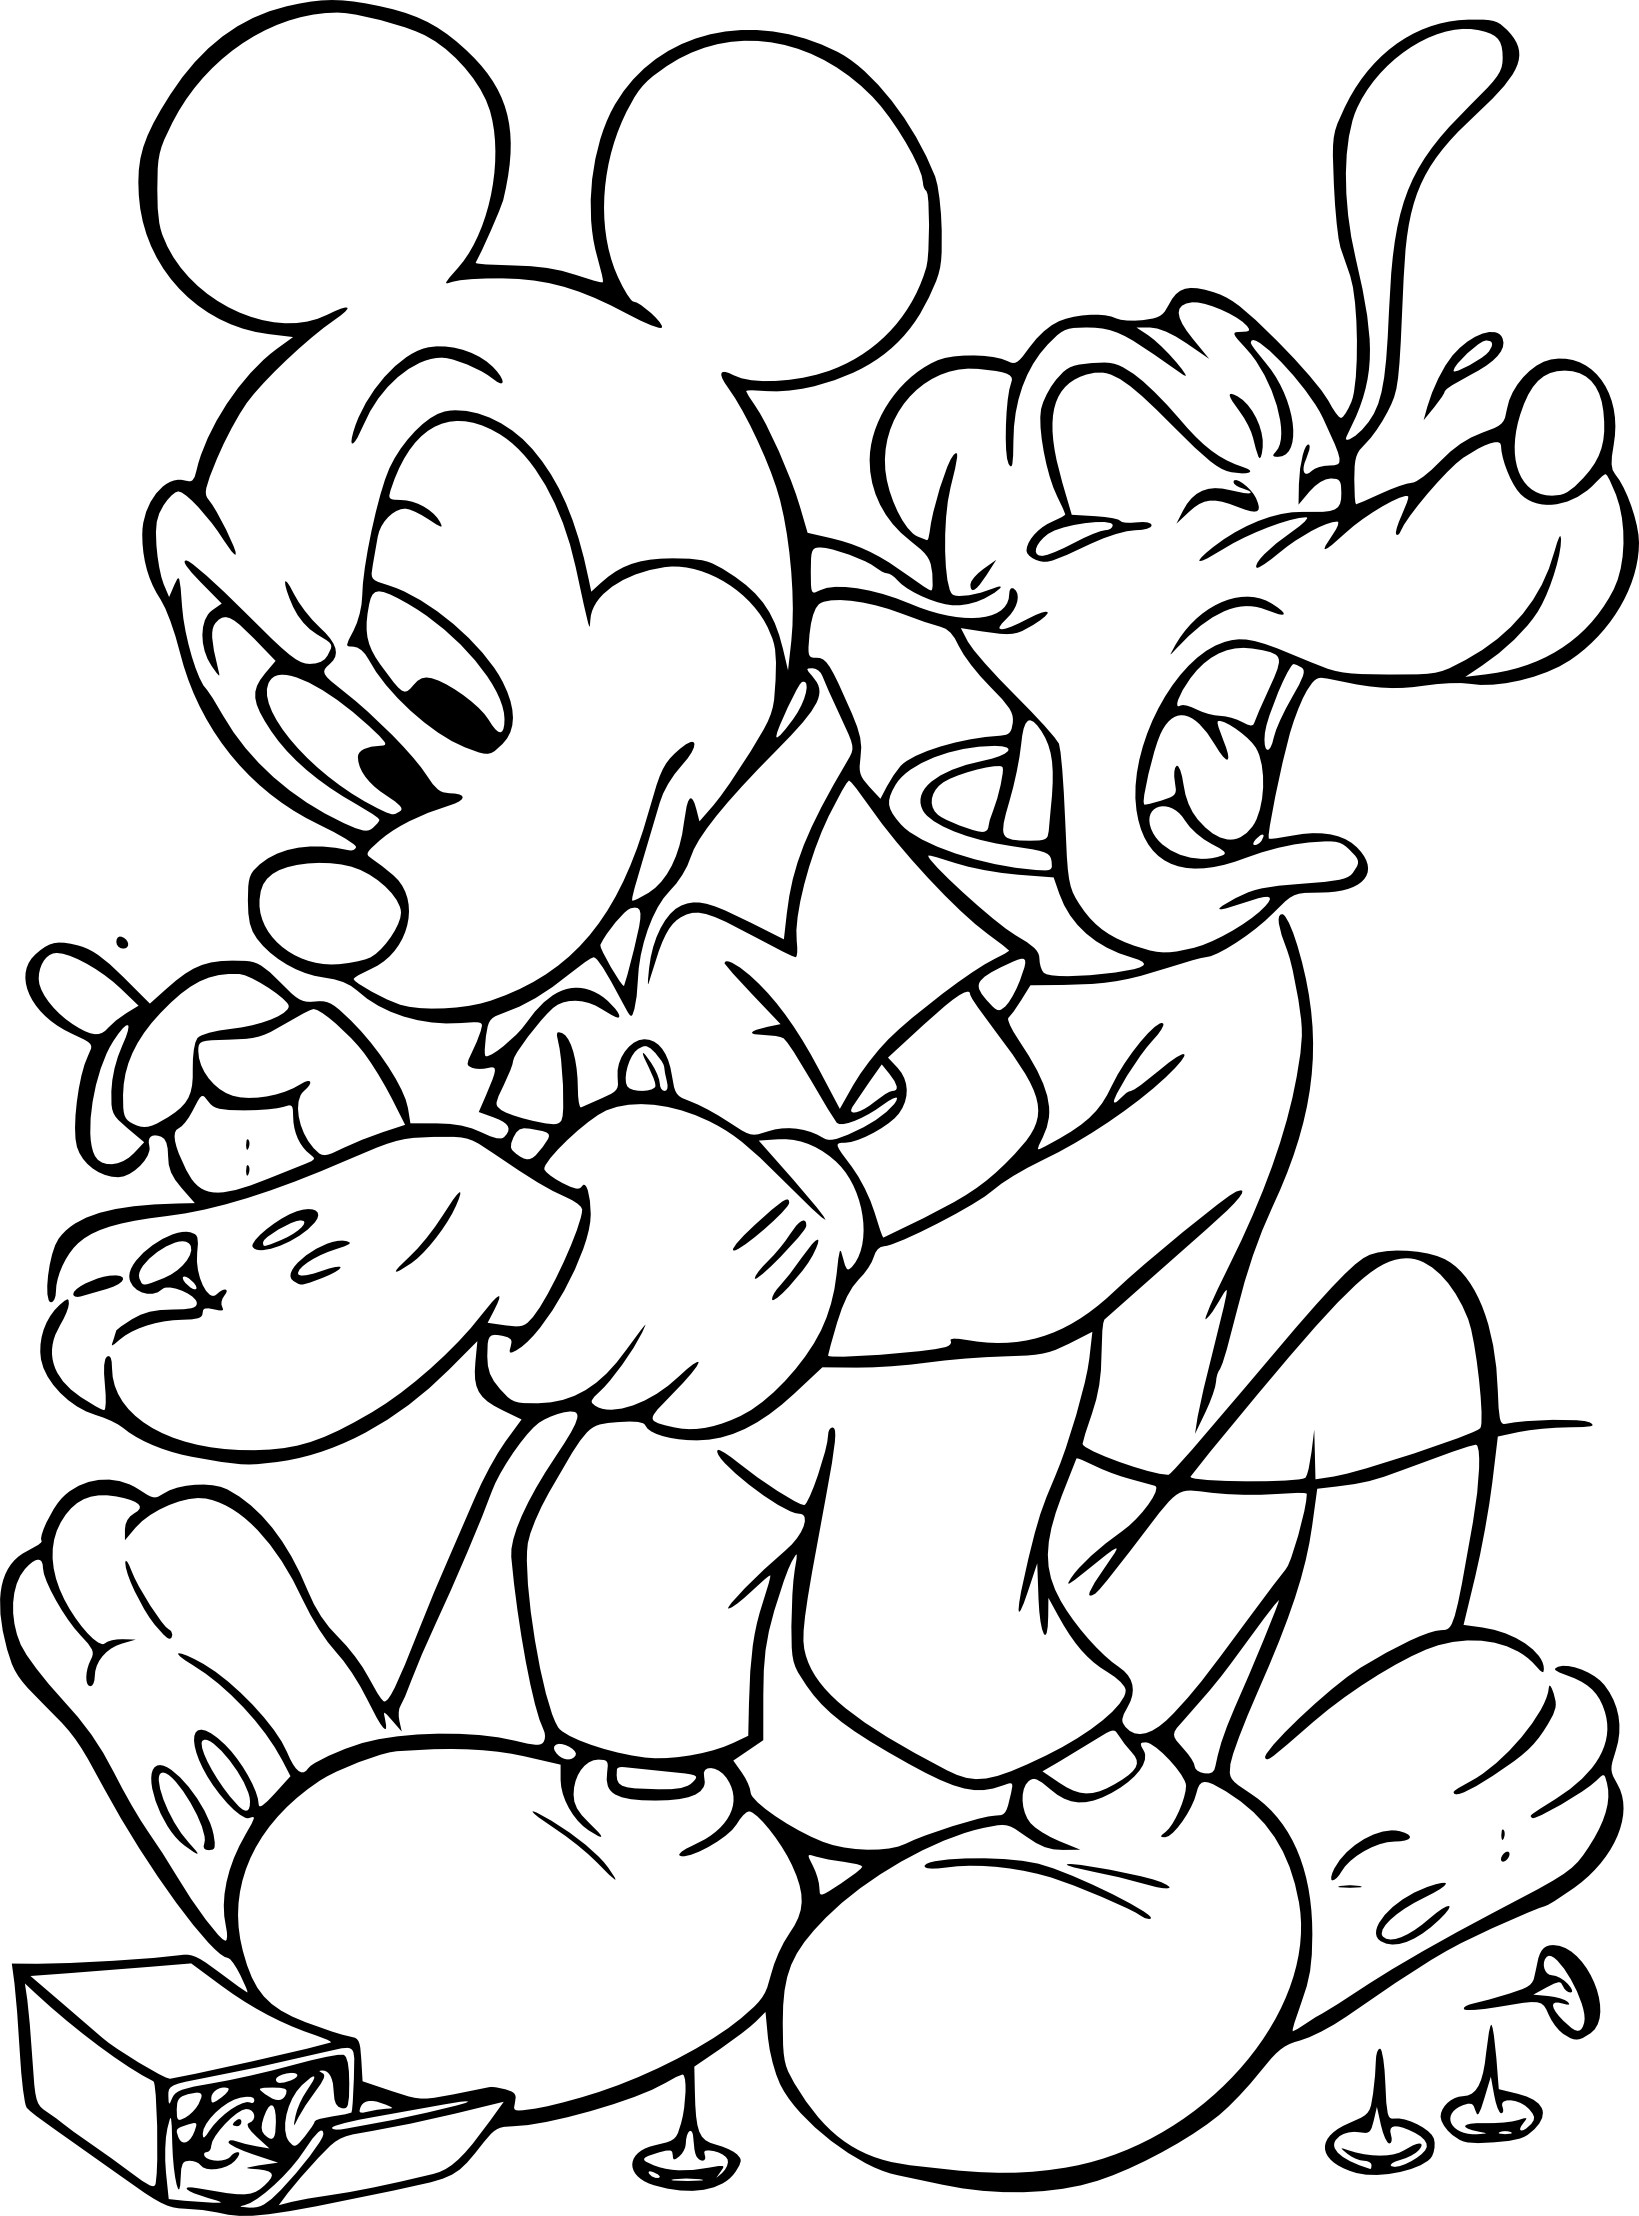 Mickey And Pluto coloring page